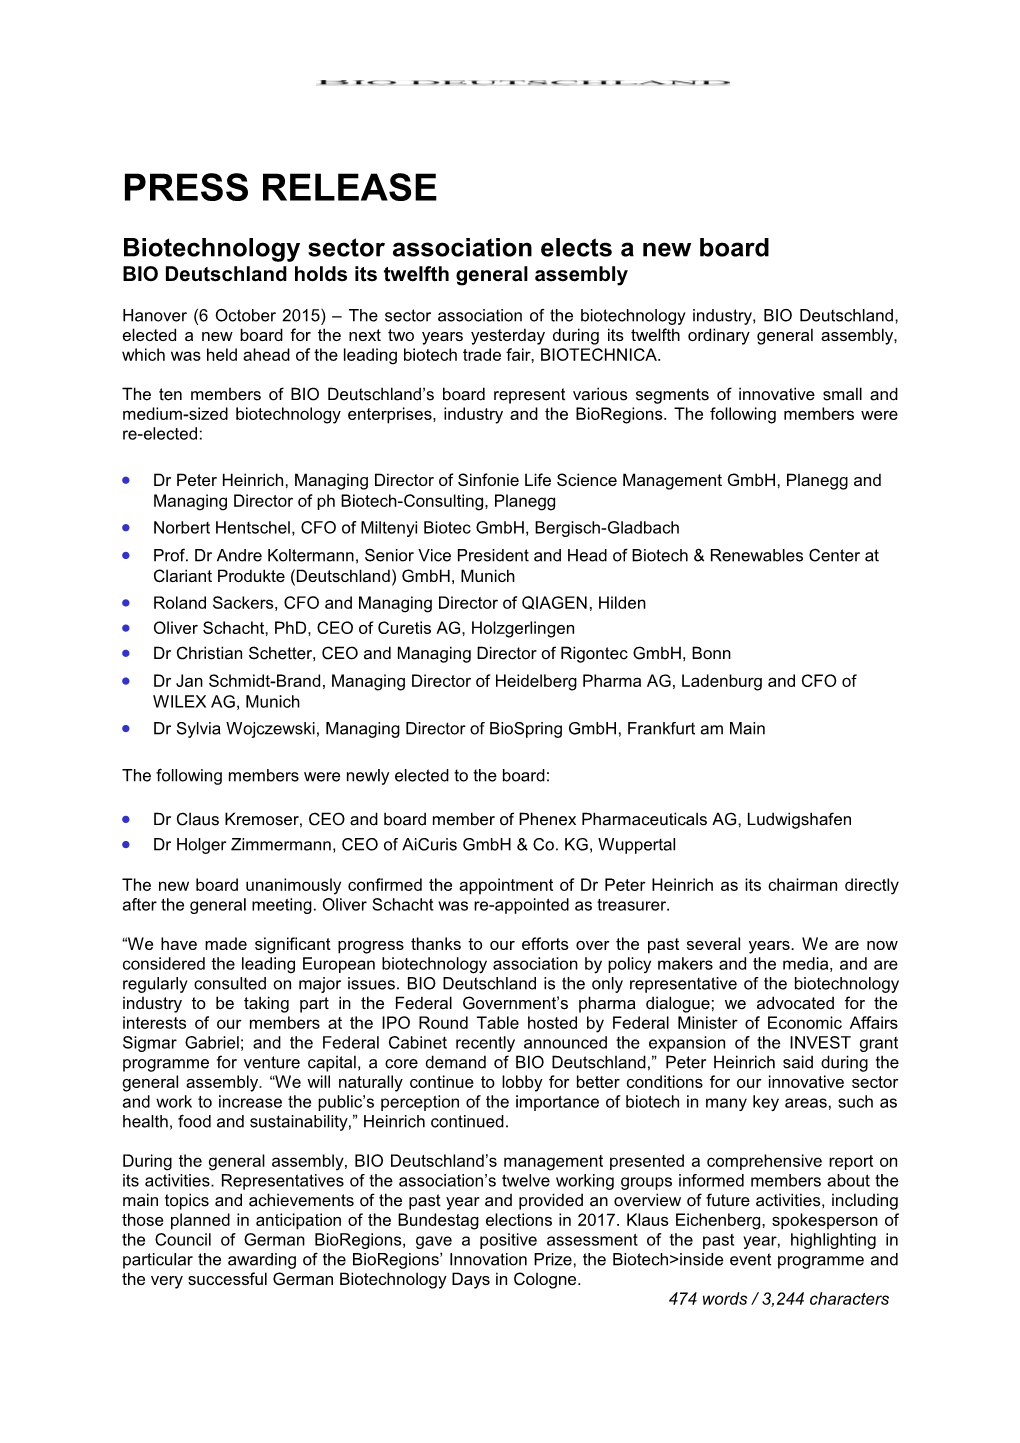 Biotechnology Sector Association Elects a New Board